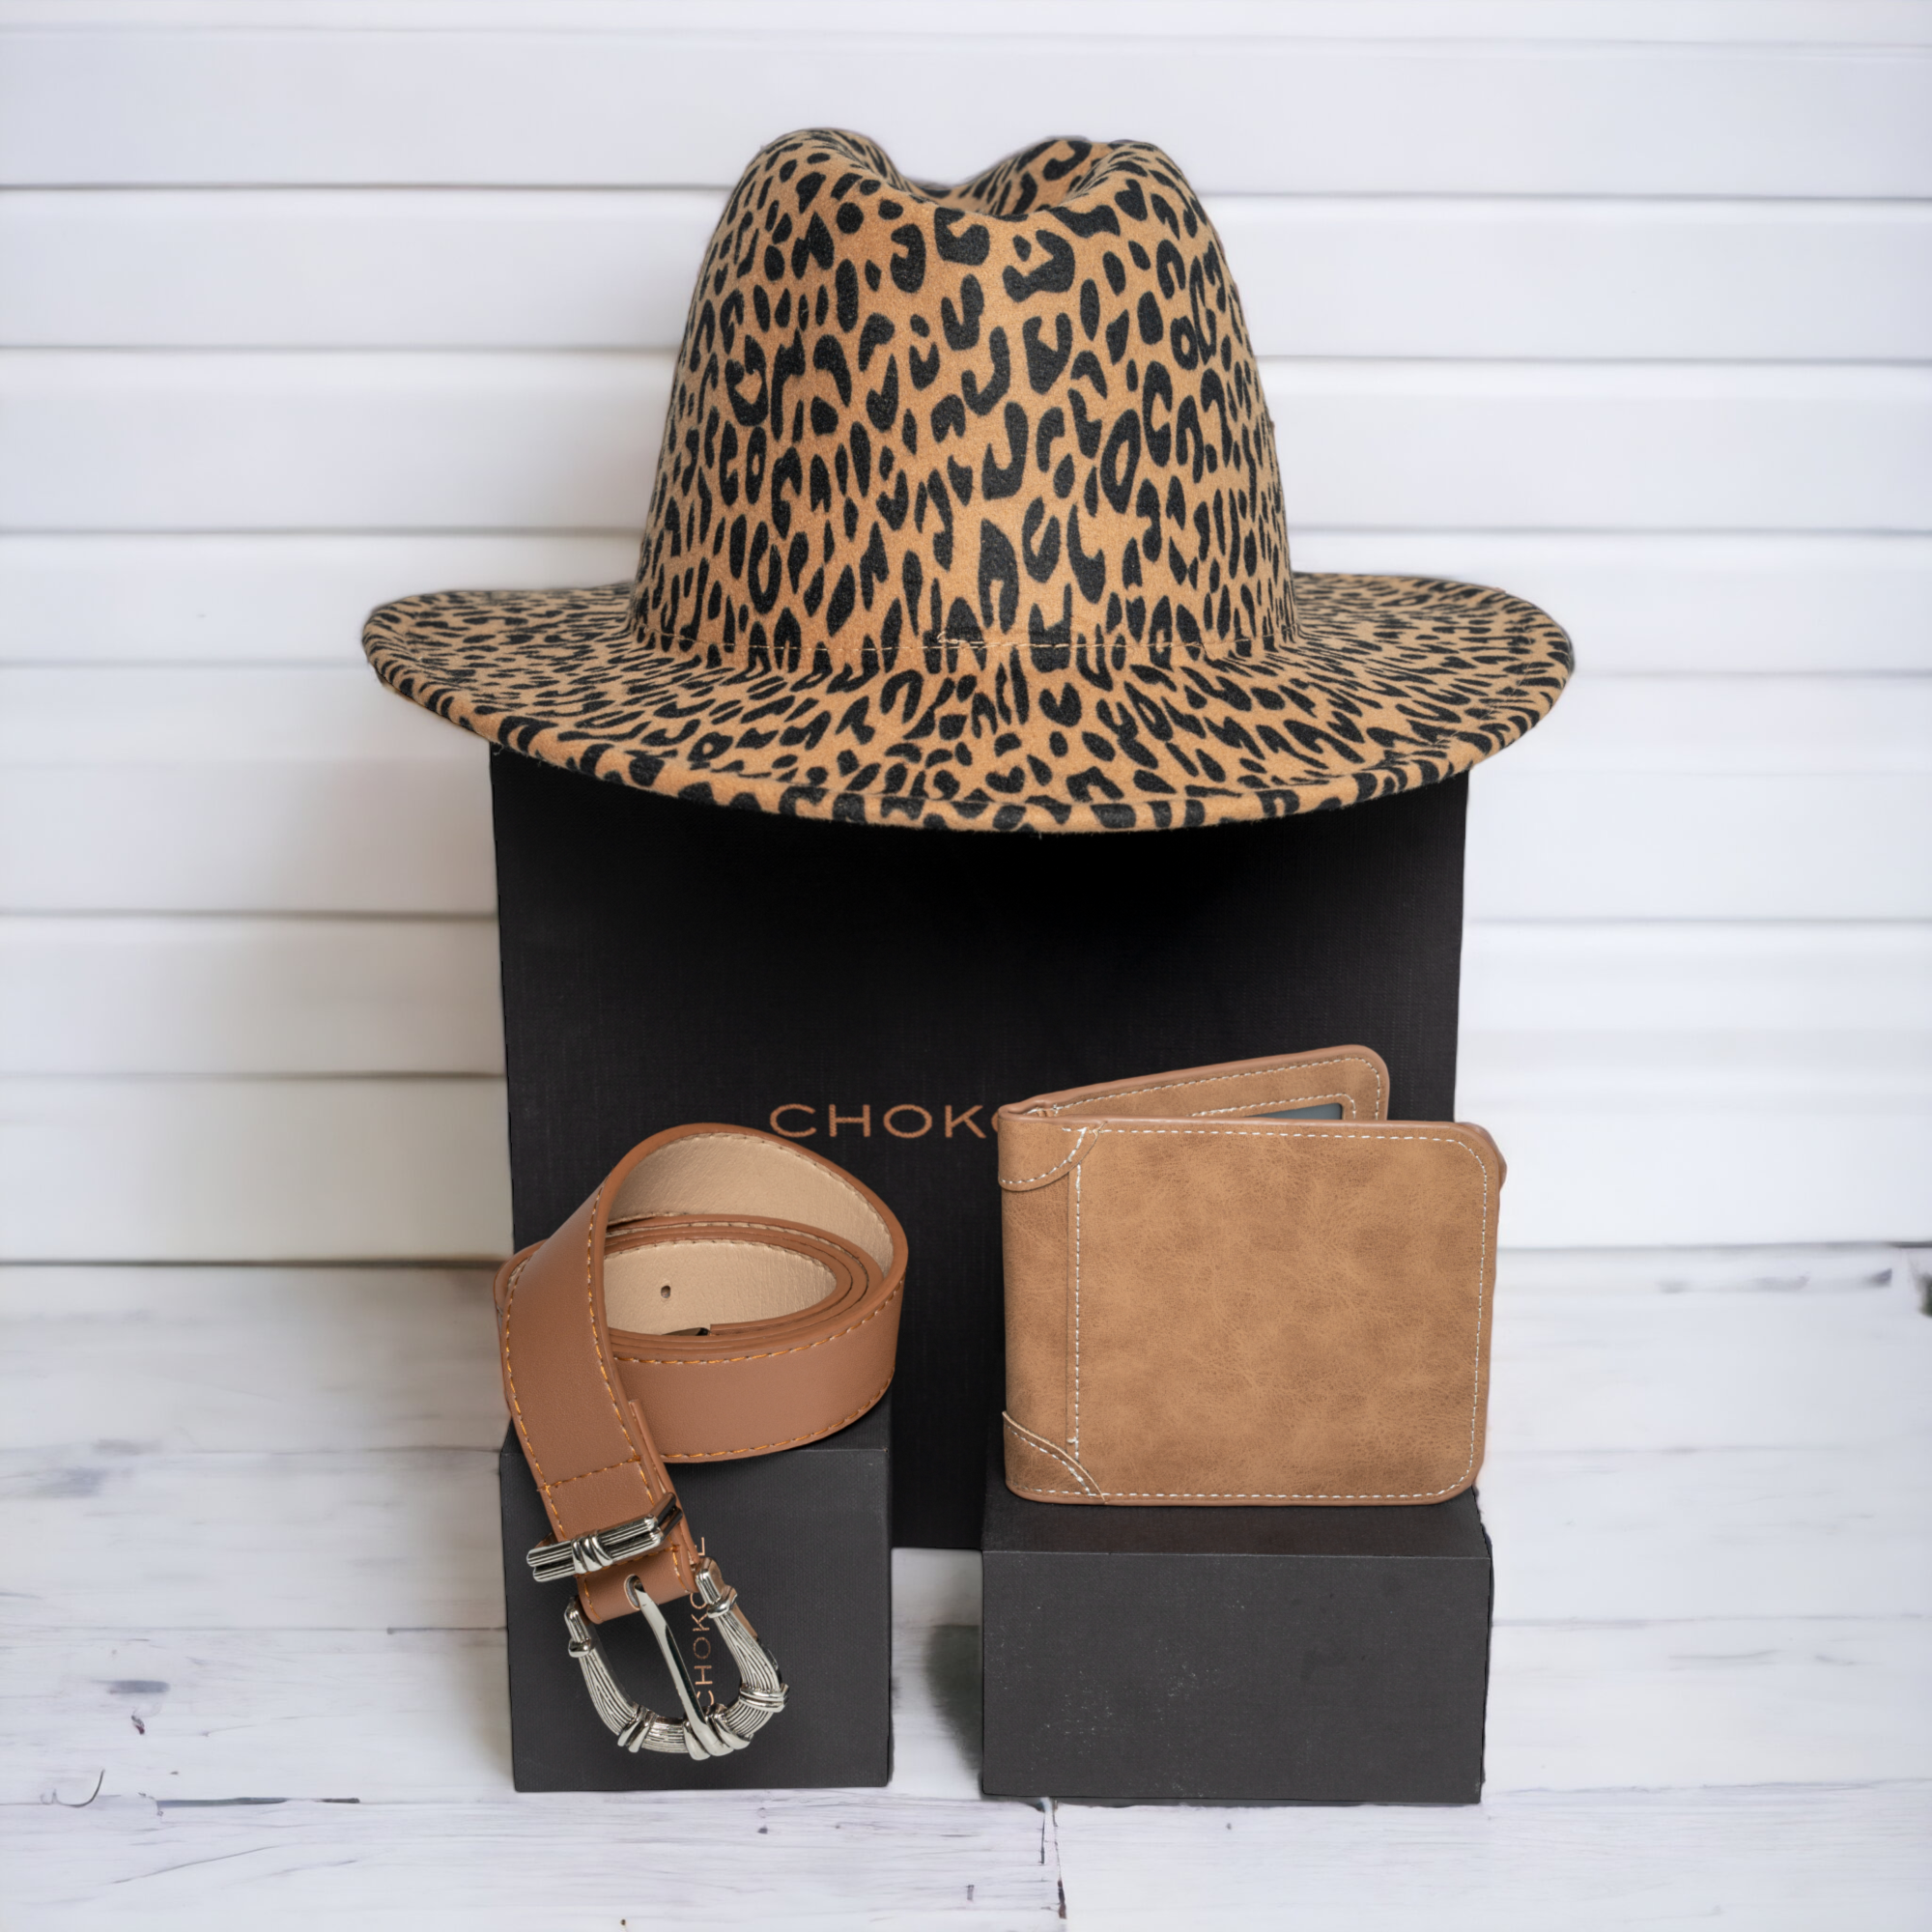 Chokore Special 3-in-1 Gift Set for Him & Her (Buckle Belt, Wallet, & Leopard print Hat)